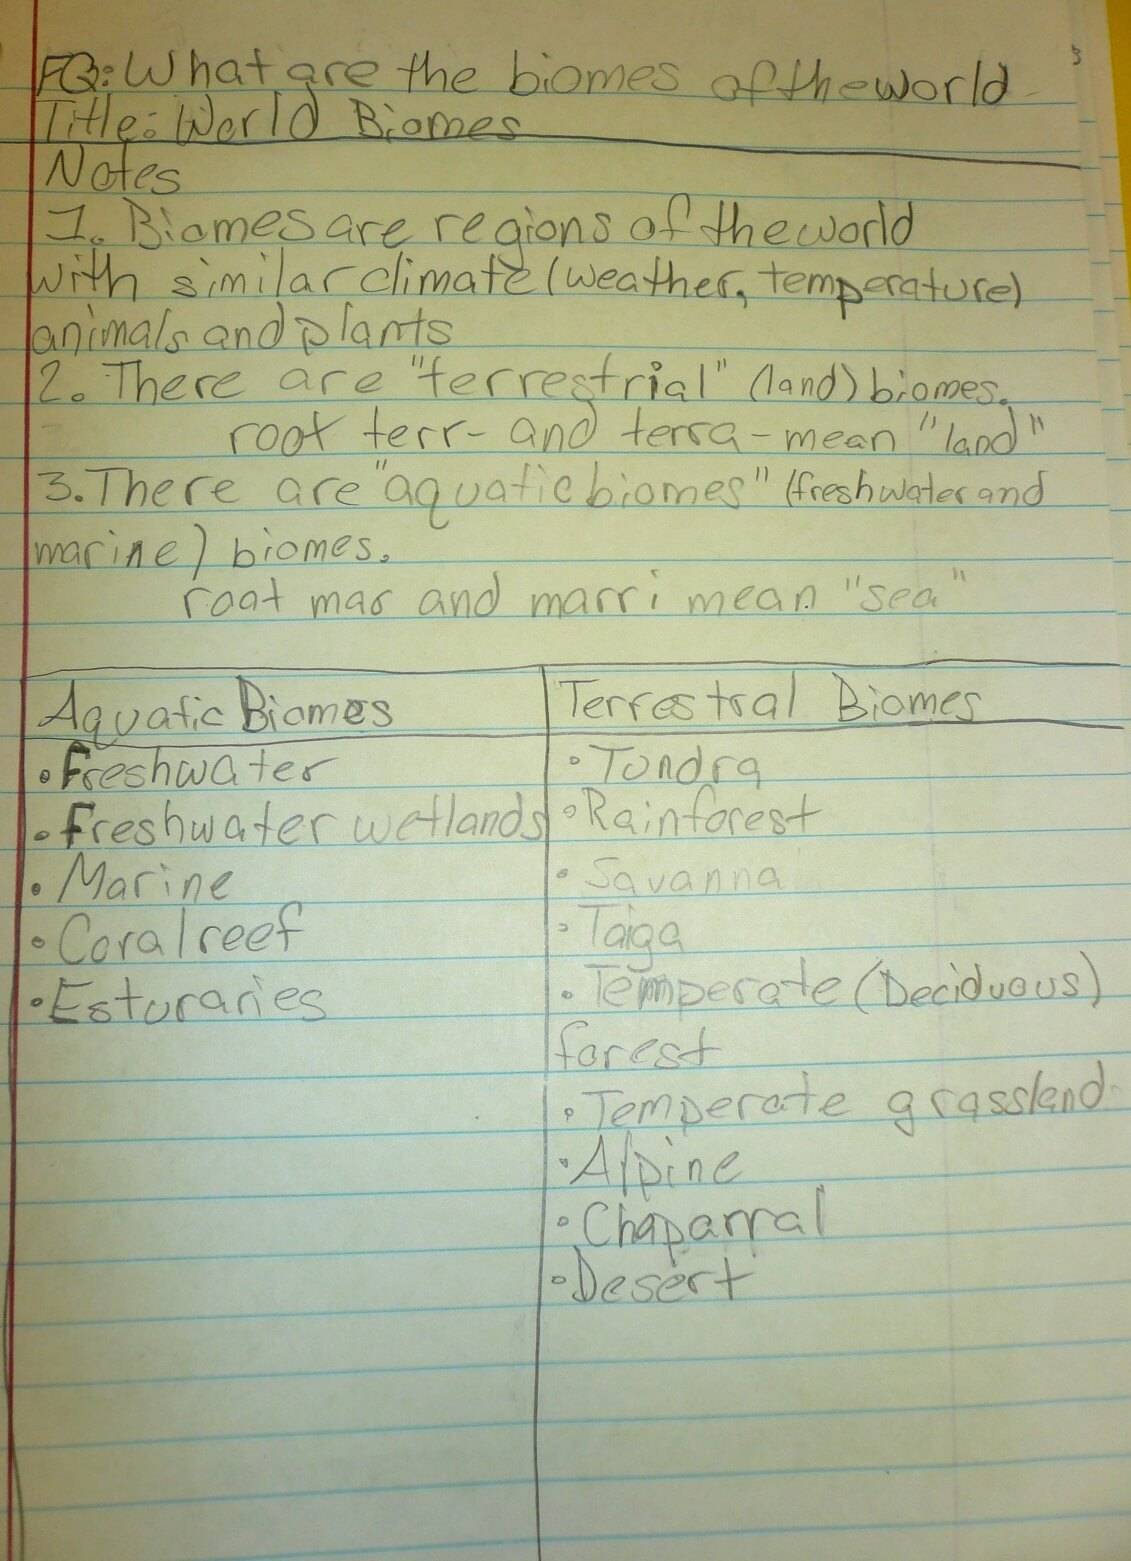 Note-Taking Science - Biomes